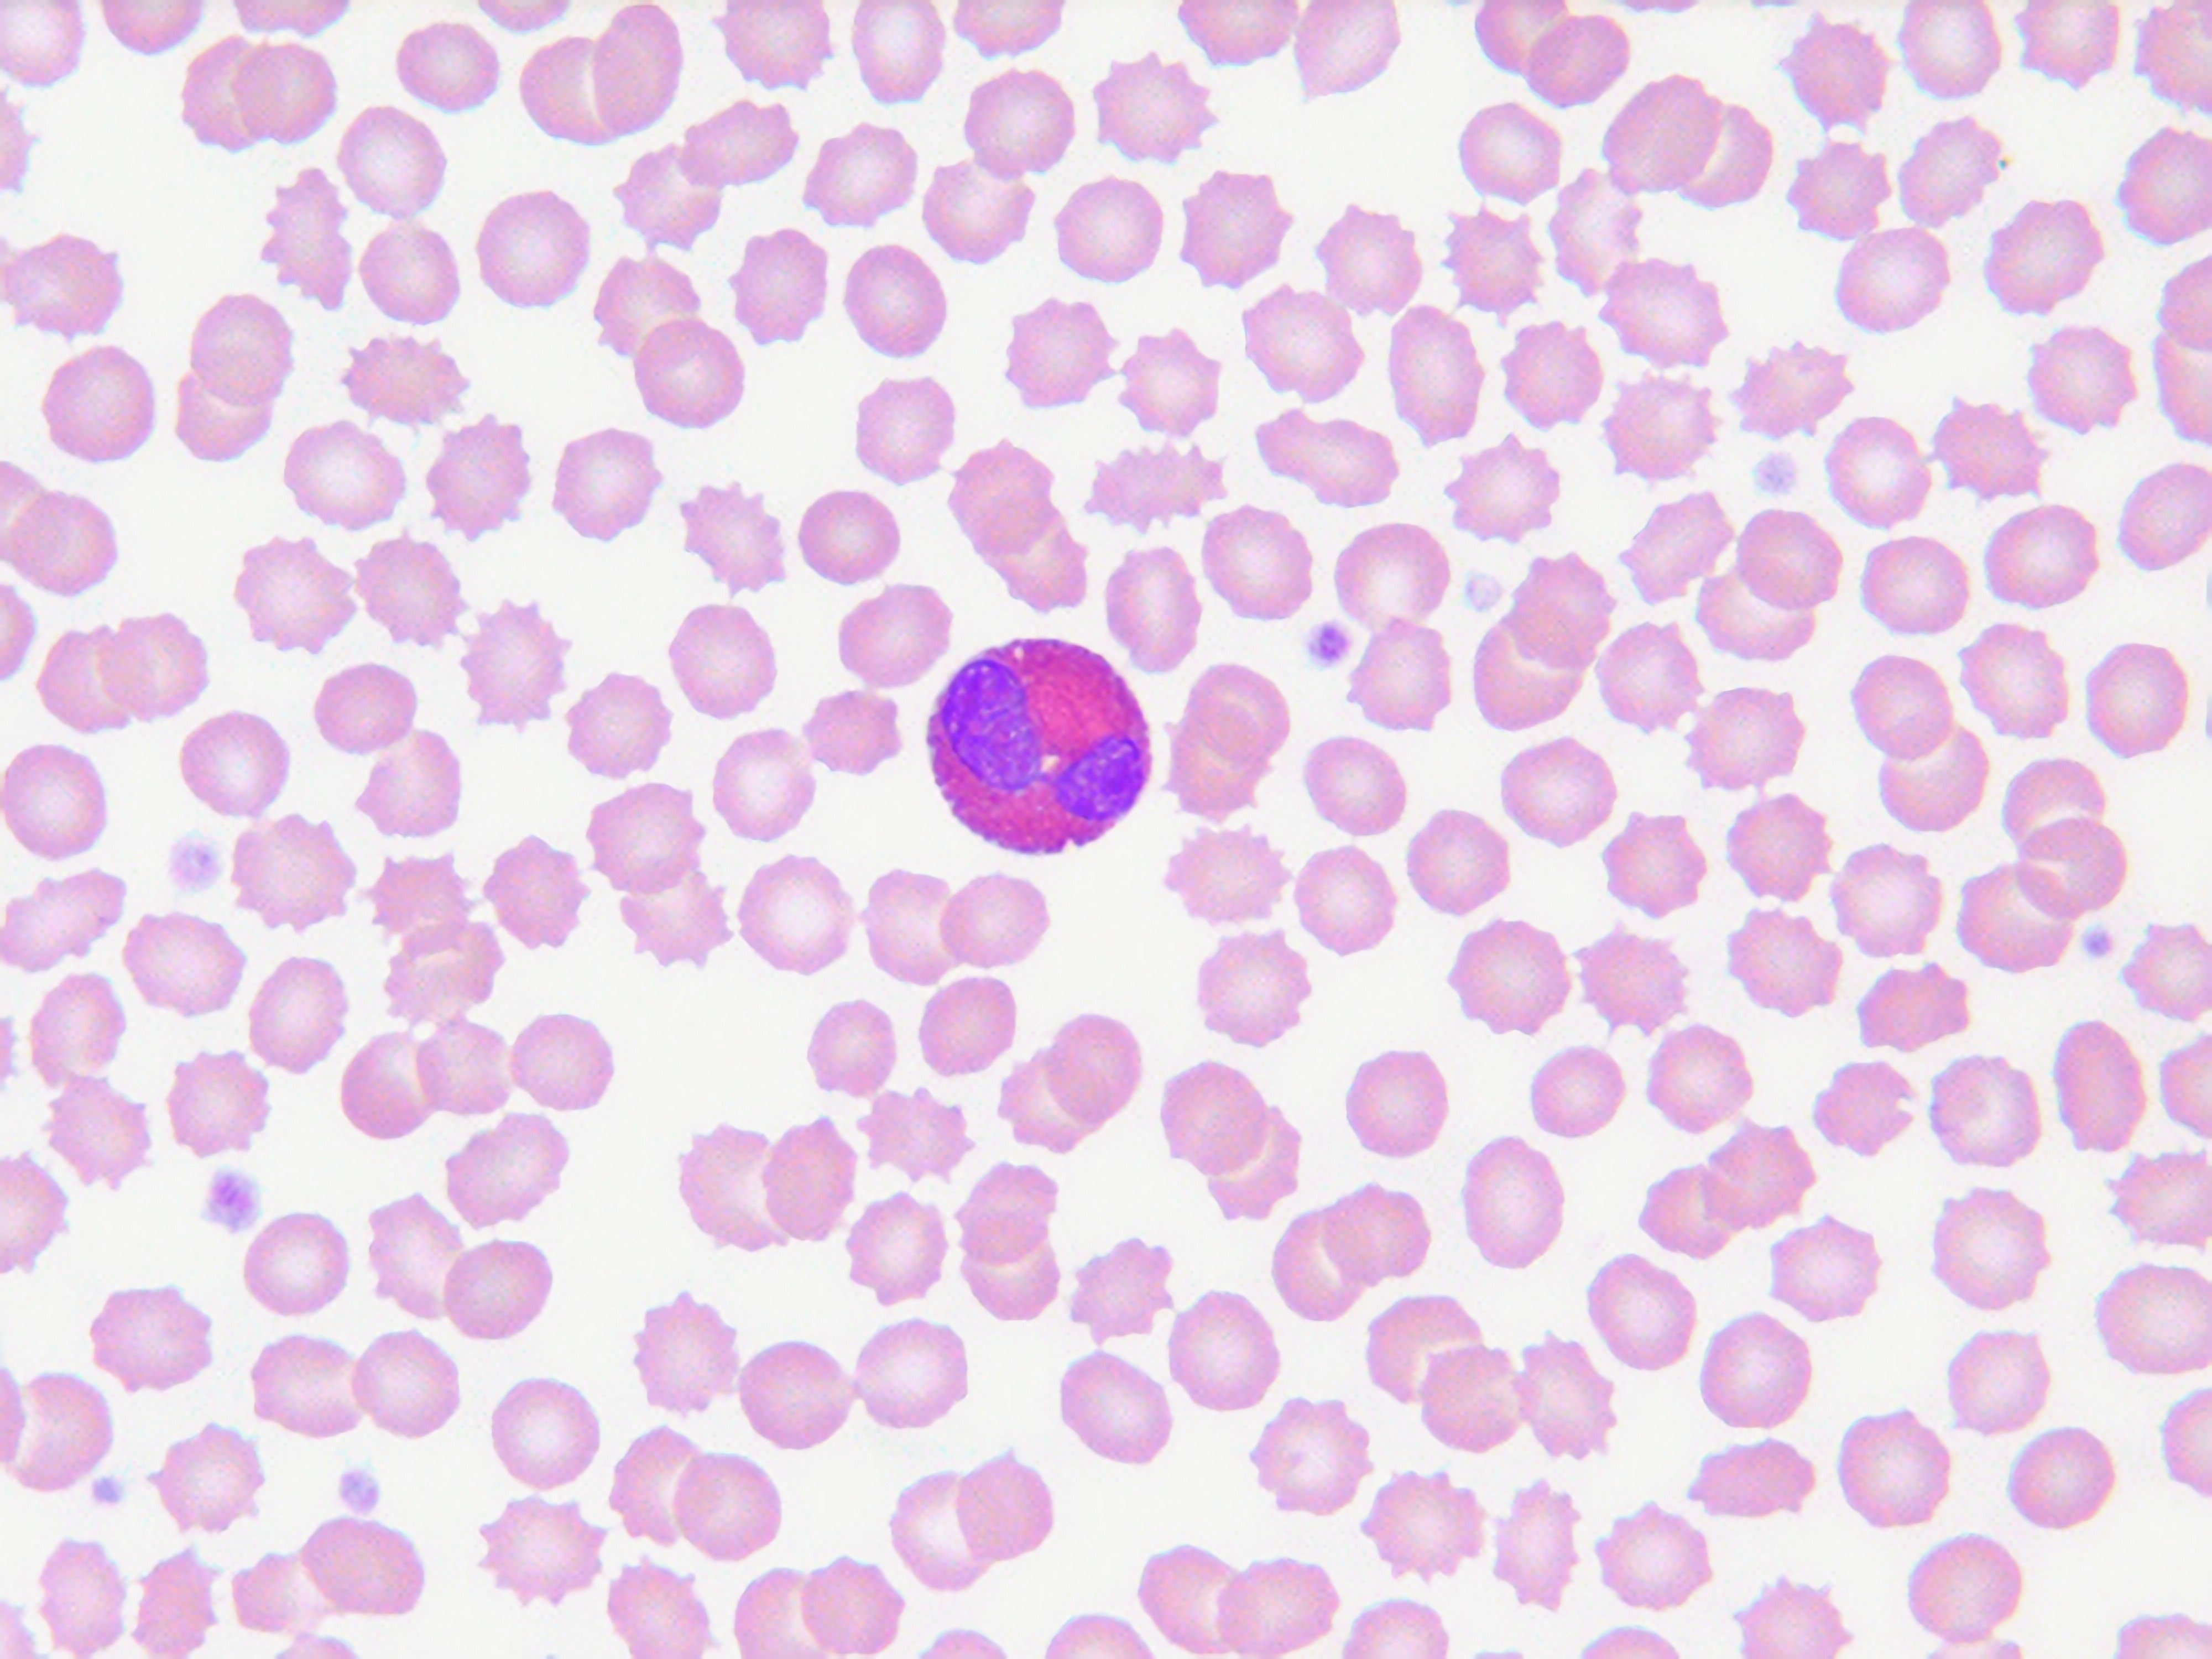 <p>-Cytoplasmic granules stain red with eosin</p><p>-Generally have two-lobed nucleus</p>